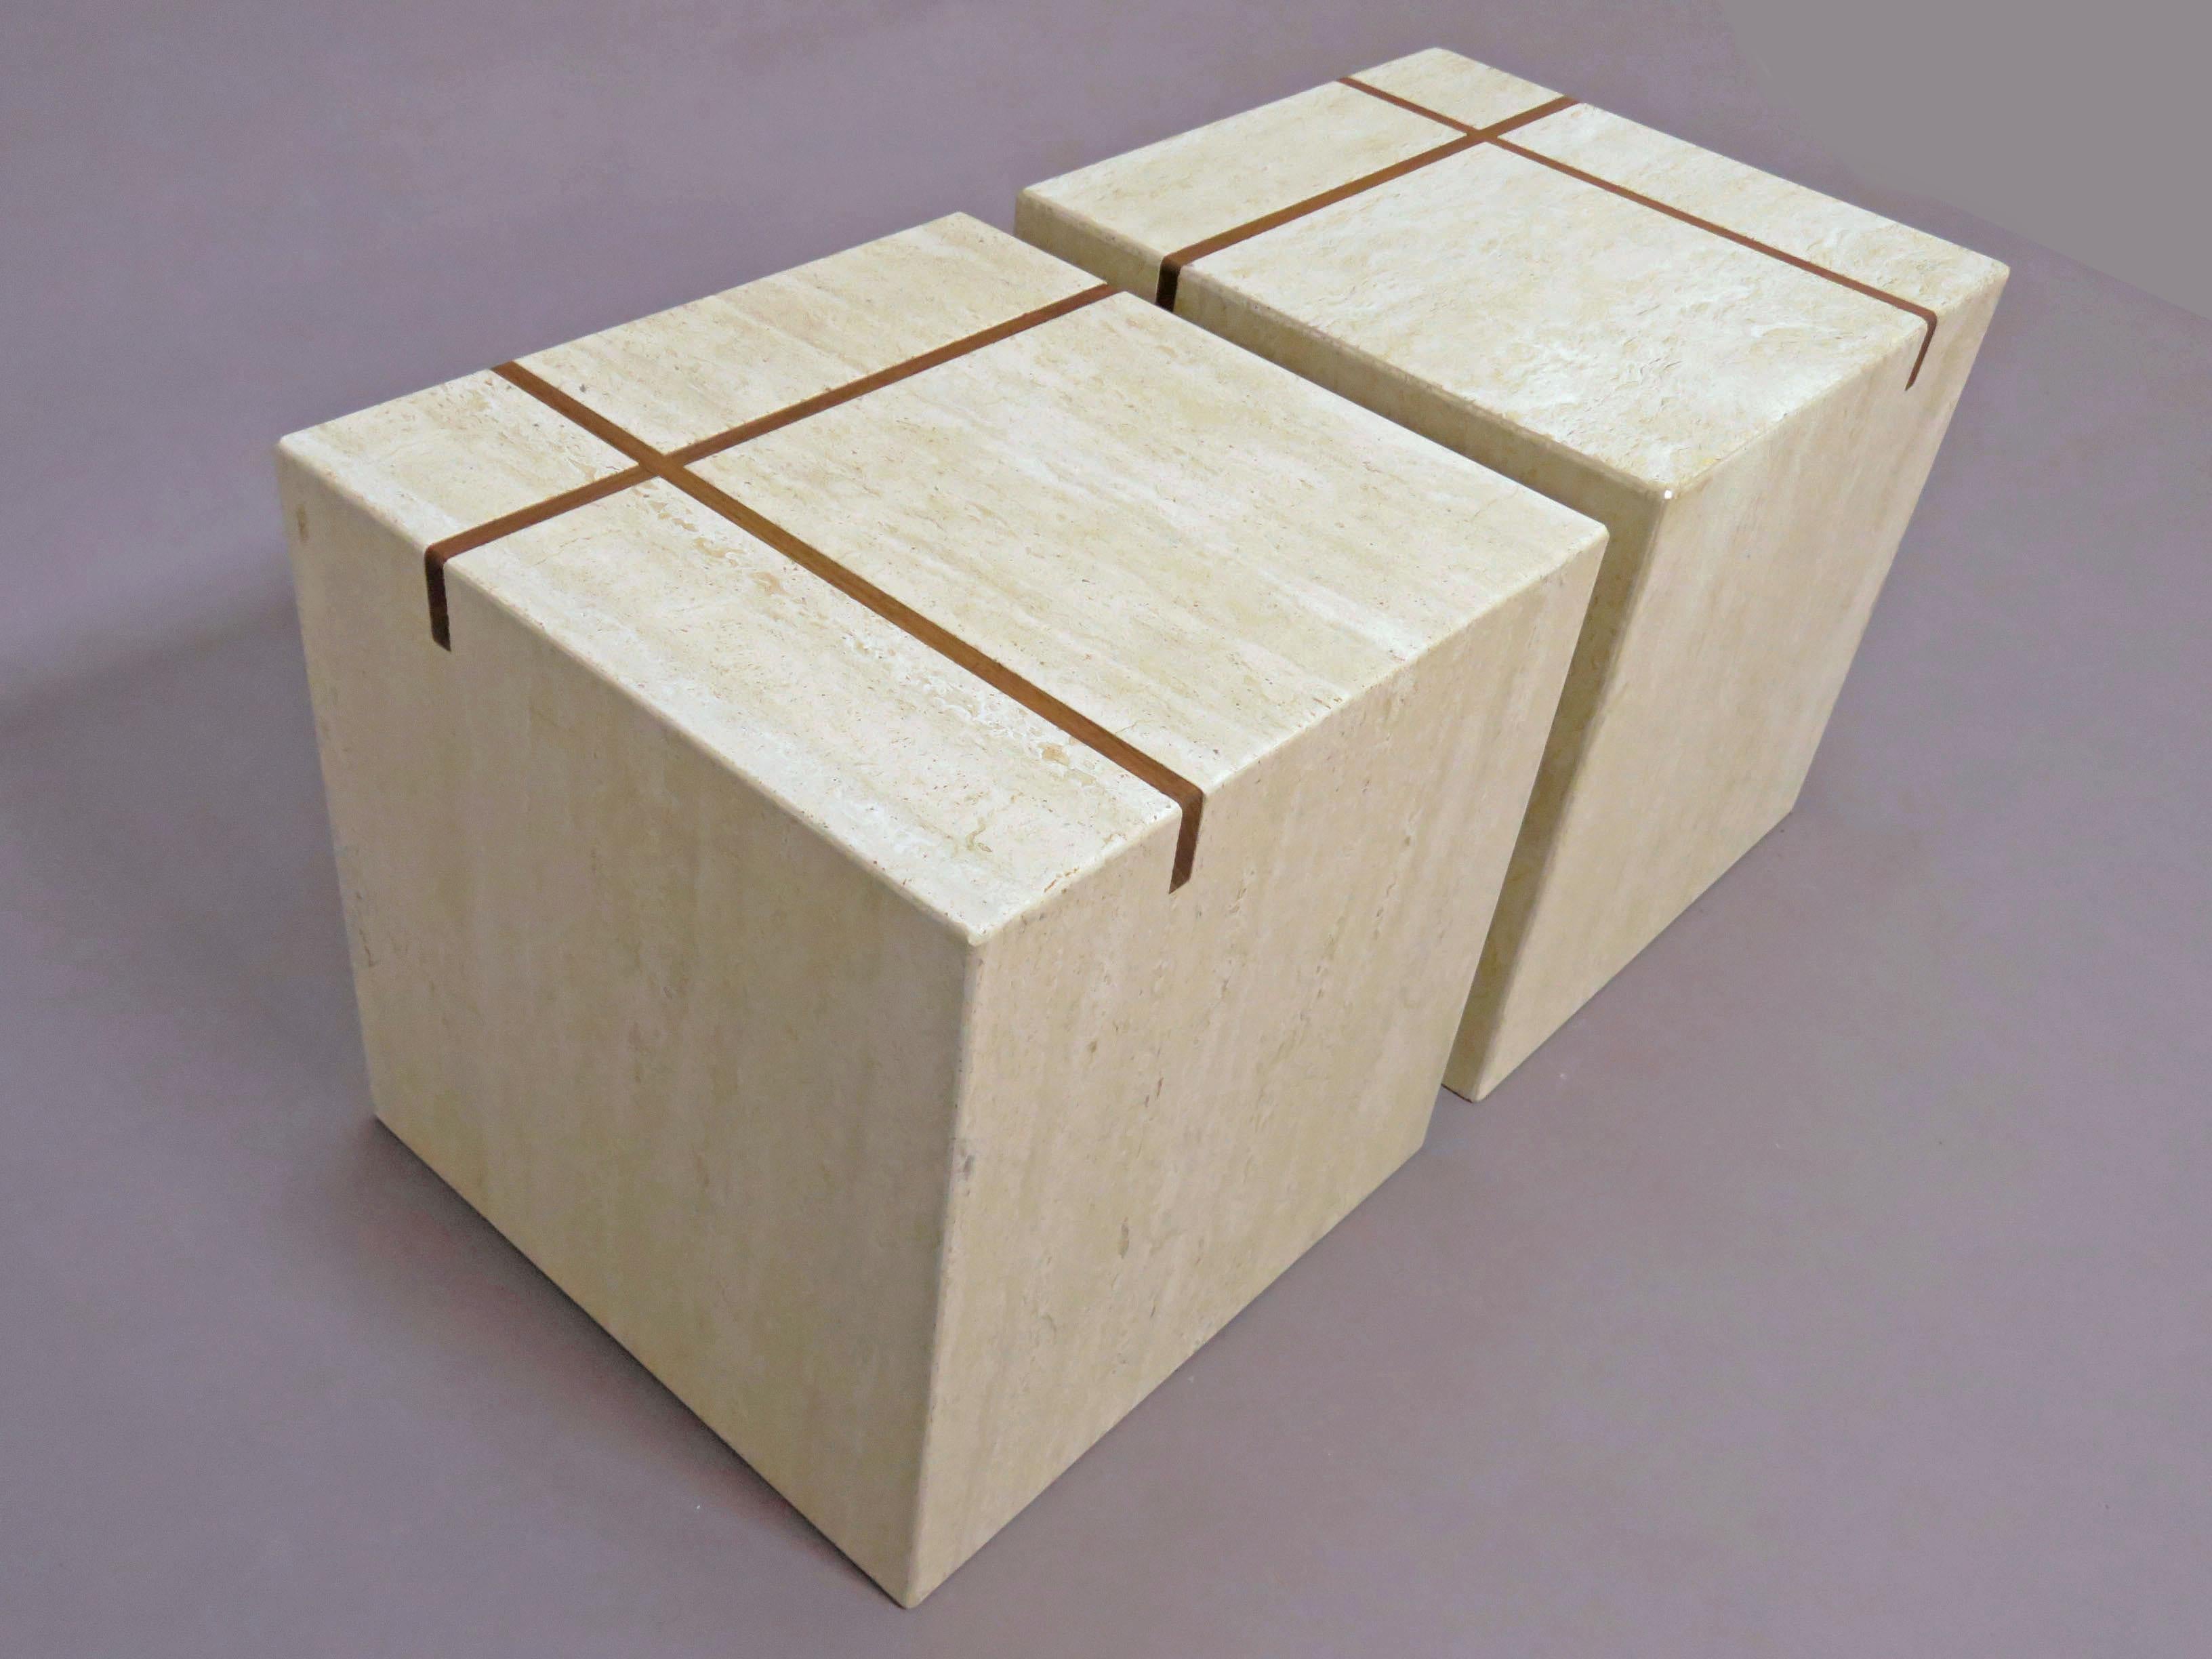 Late 20th Century Pair of Travertine Cube End Tables with Teak Banded Inlay, circa 1970s